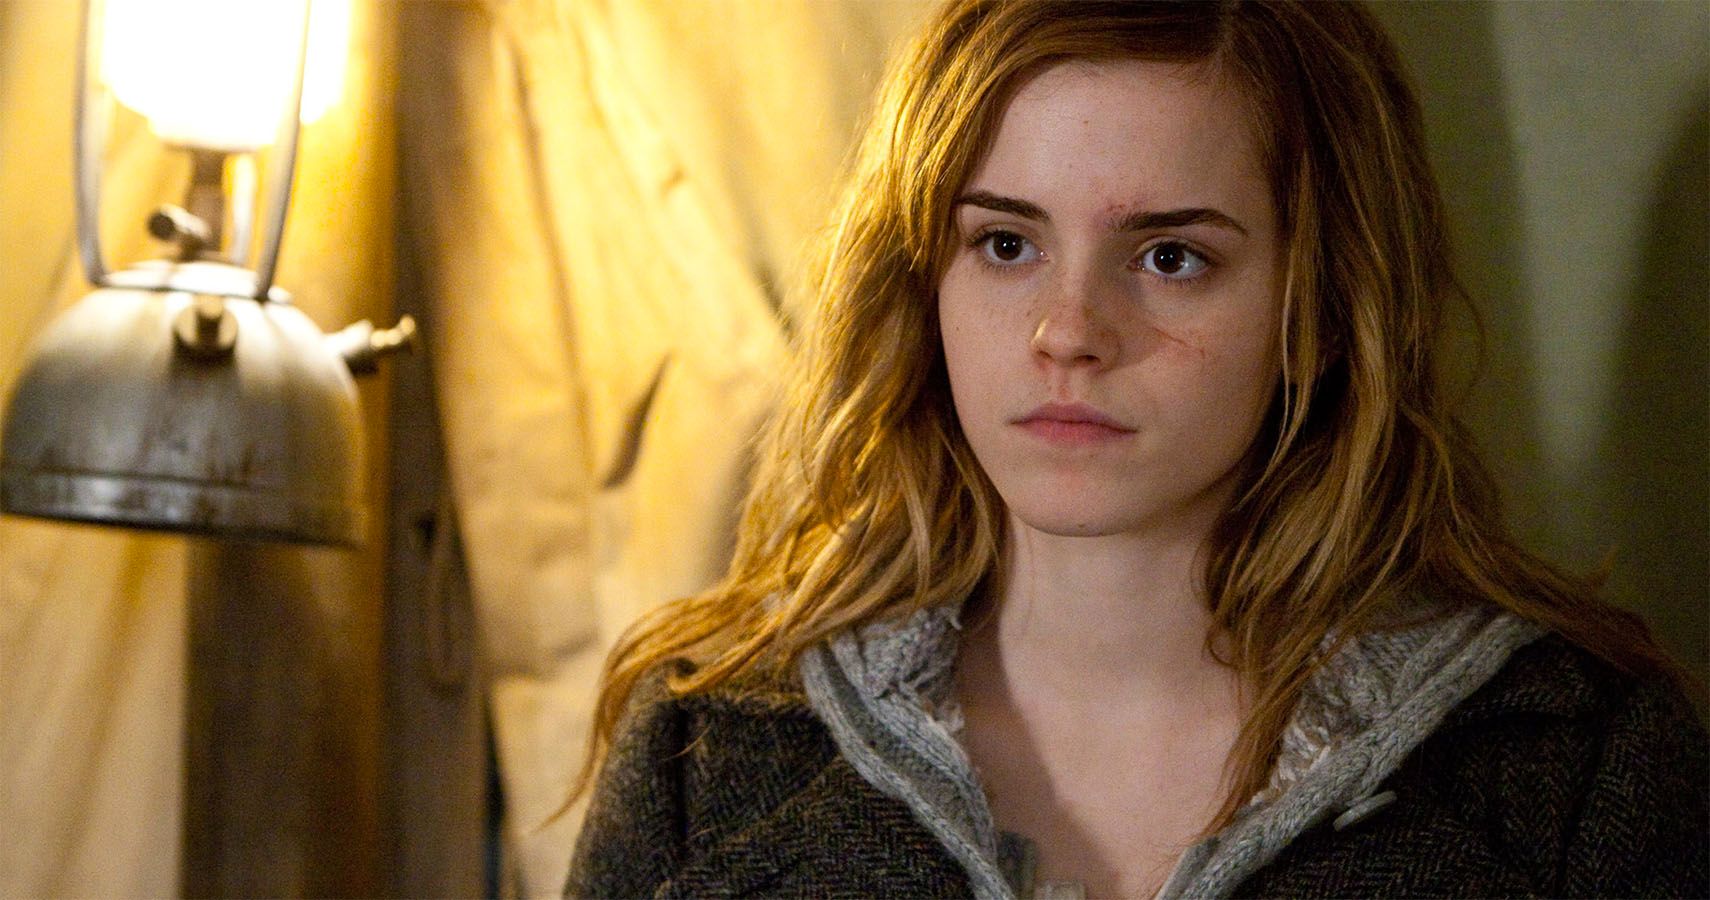 Empowering Quotes From Hermione Granger To Muggle Women